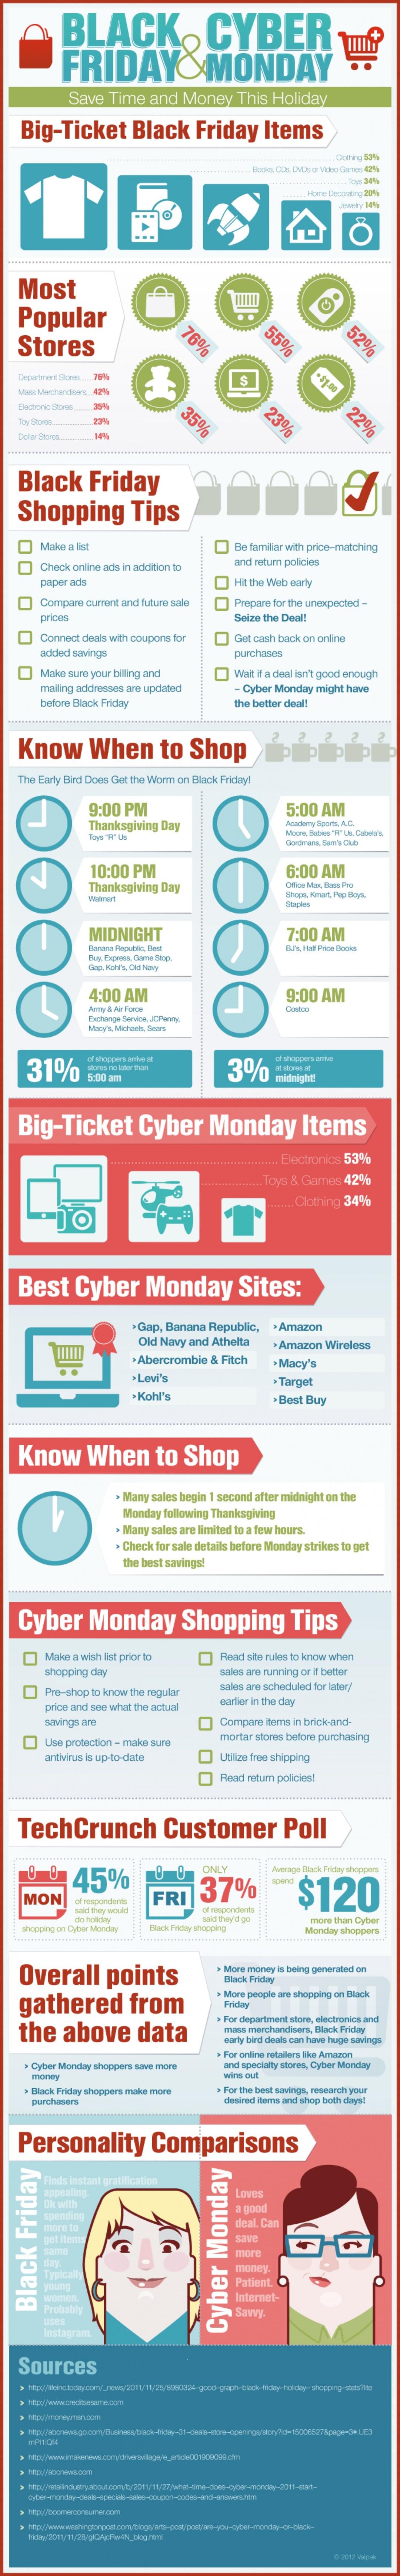 Black Friday And Cyber Monday Shopping Tips To Save Money